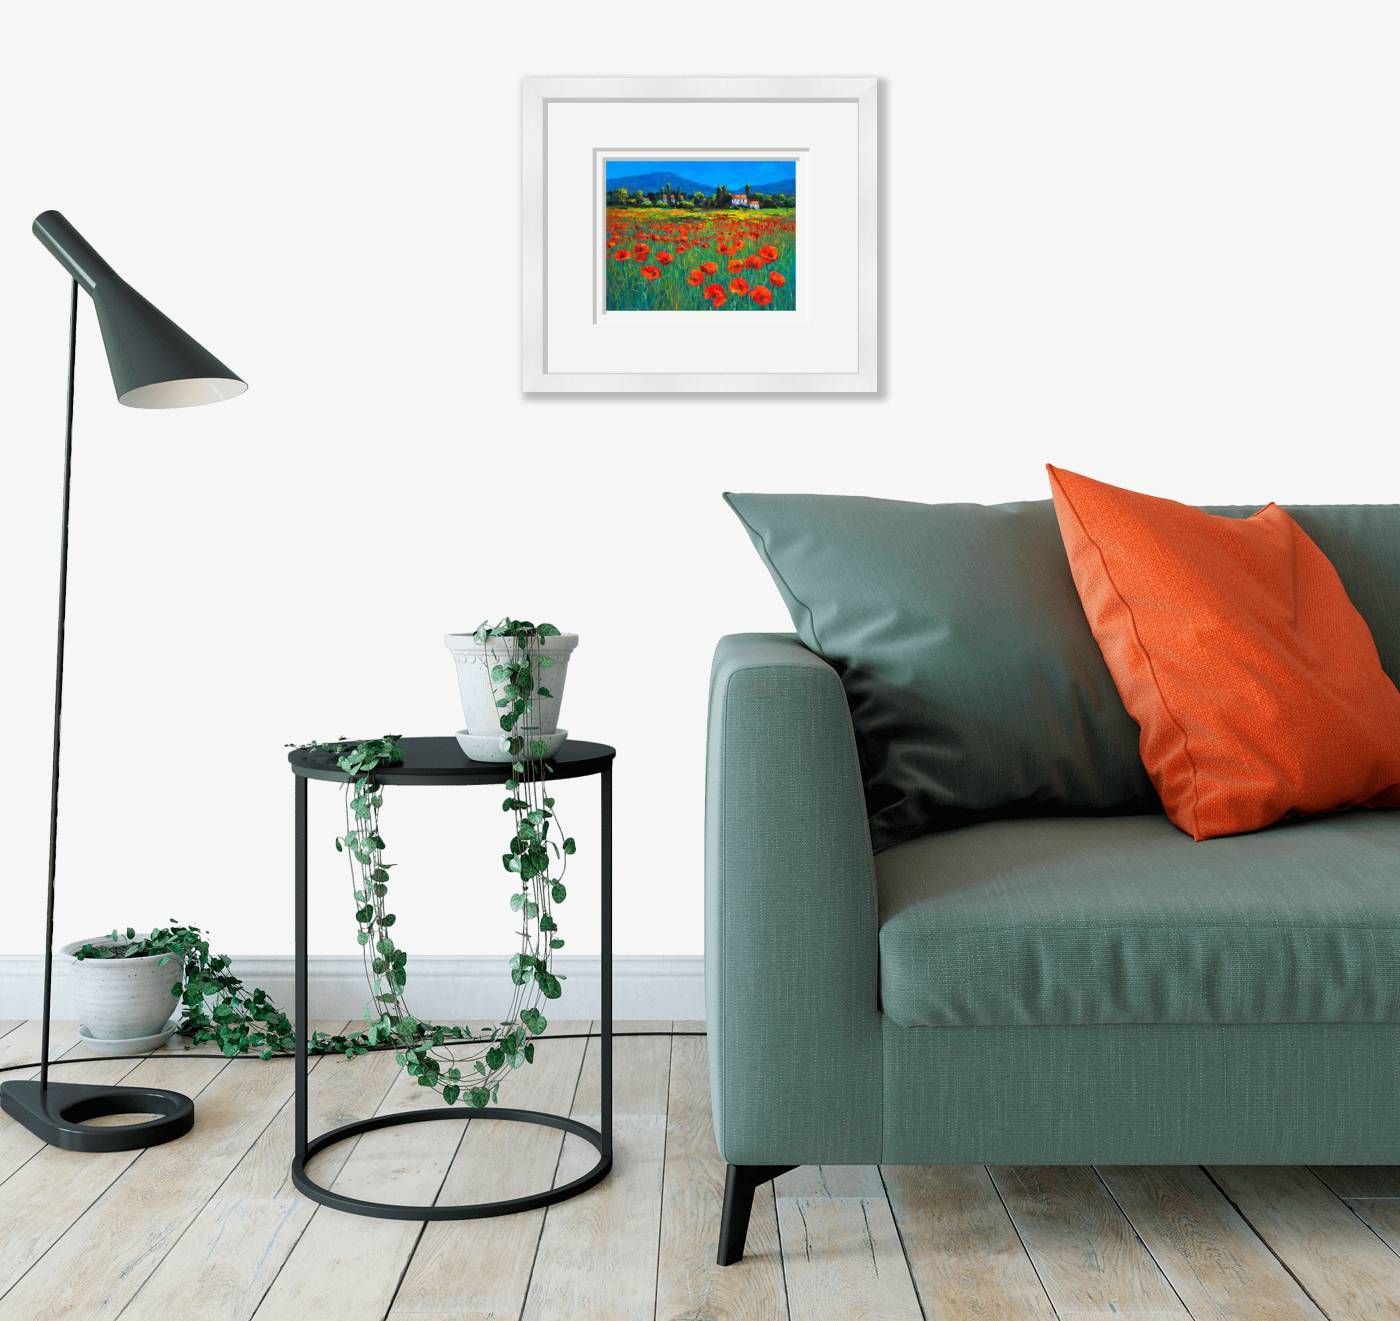 Medium framed  - Poppies in Provence - 468 by Chris McMorrow